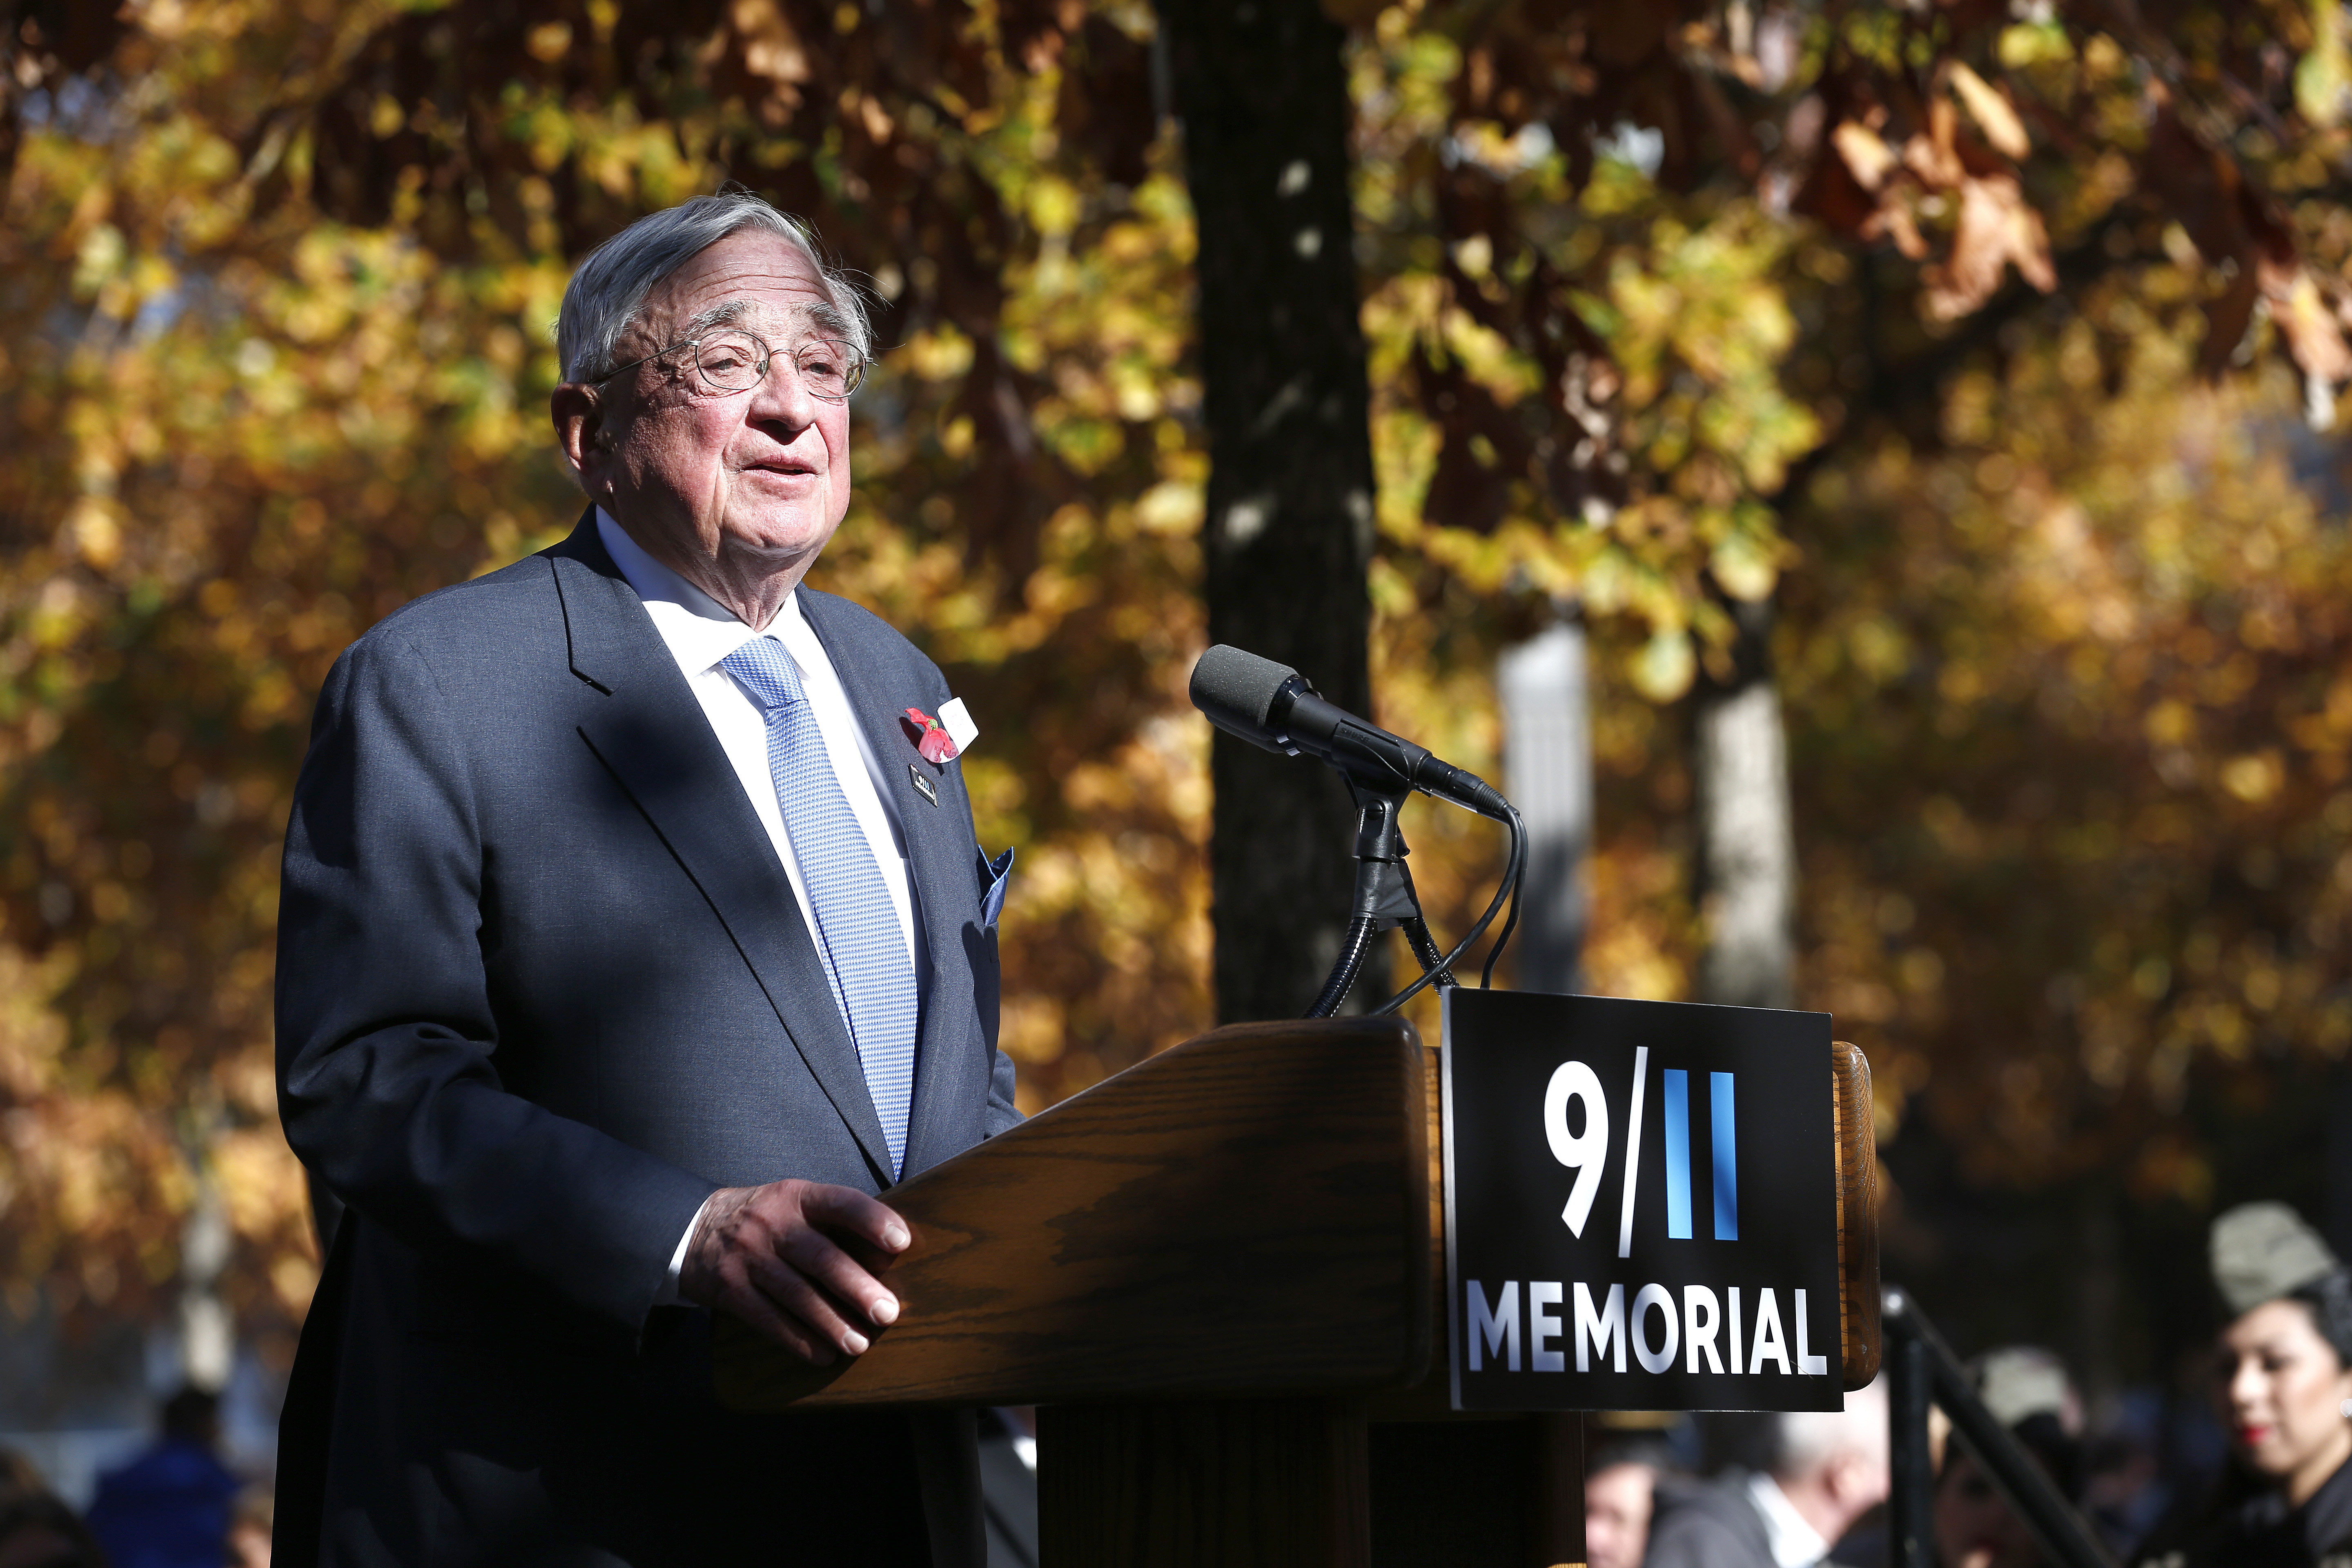 John E. Zuccotti wears a suit and tie as he speaks at a podium on the 9/11 Memorial.